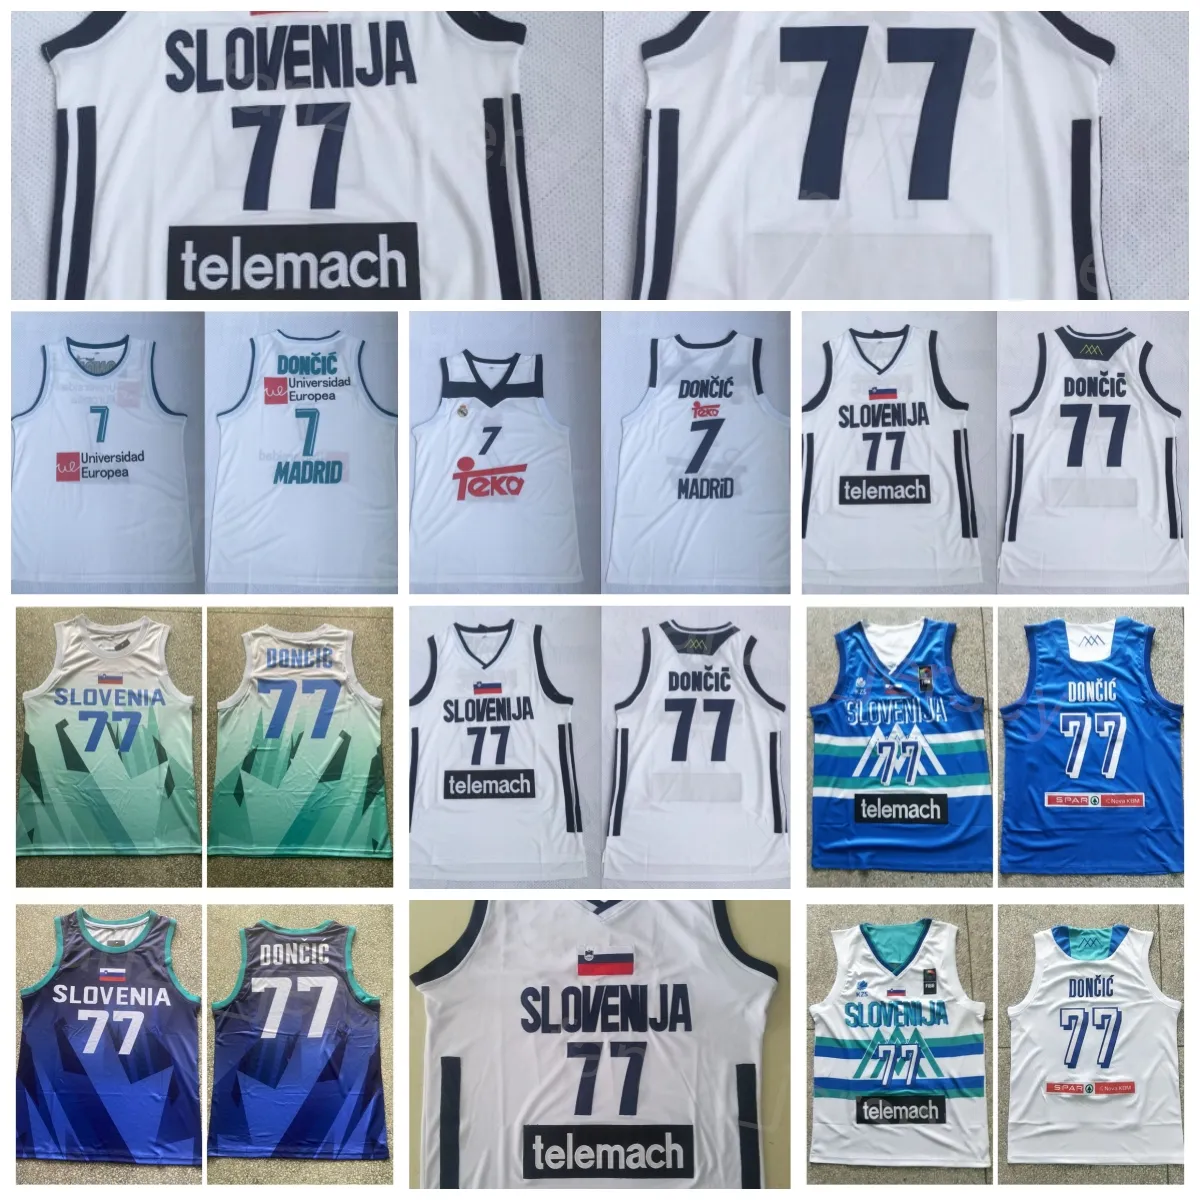 Slovenia Basketball 7 Luka Doncic Jersey 77 Euroleague Europe National Team College Embroidery And Sewing University Team Blue White Color Breathable Sport